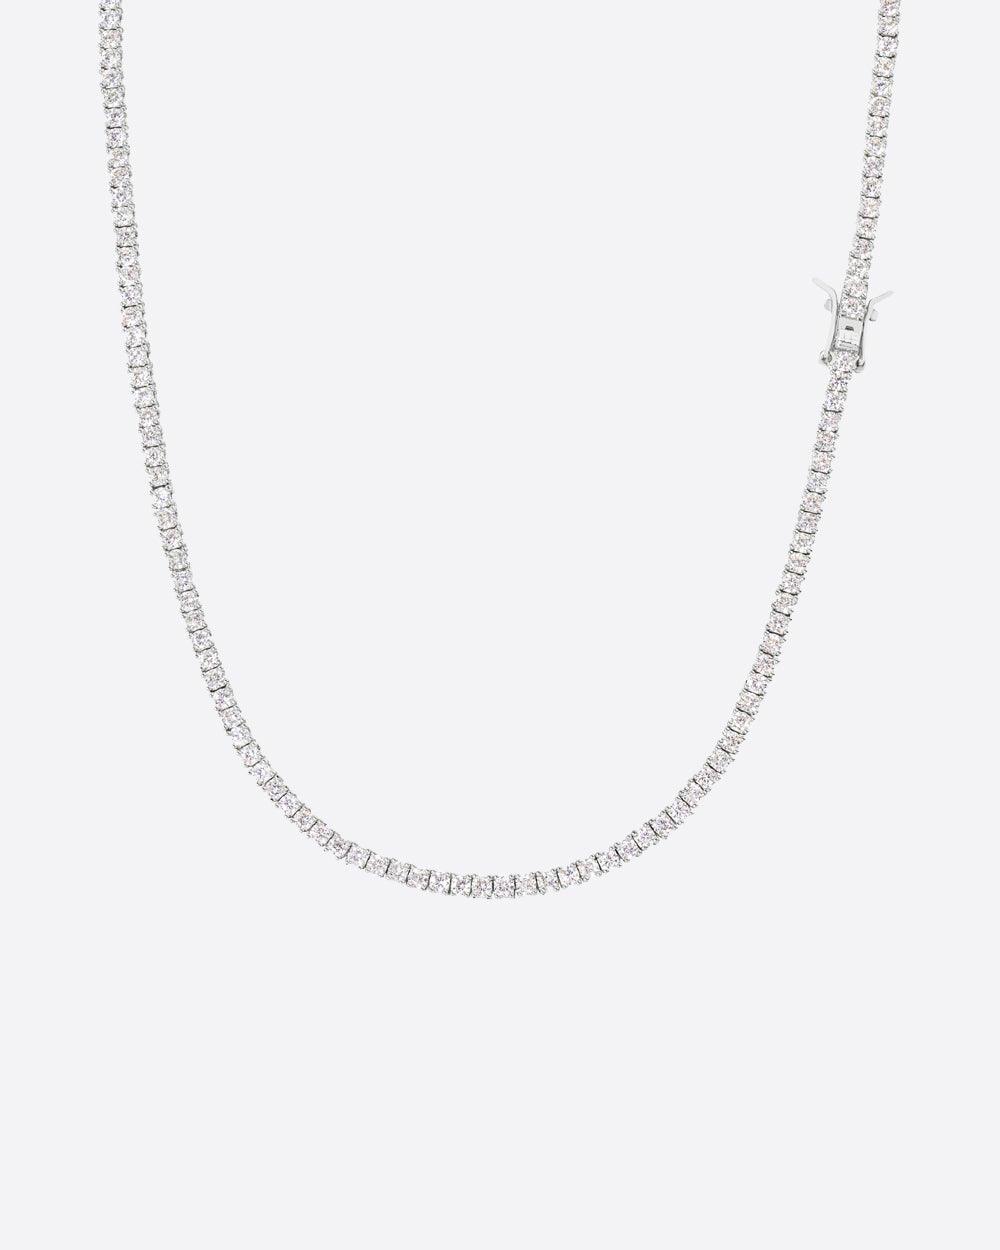 MICRO TENNIS CHAIN. - 2.5MM WHITE GOLD - DRIP IN THE JEWEL